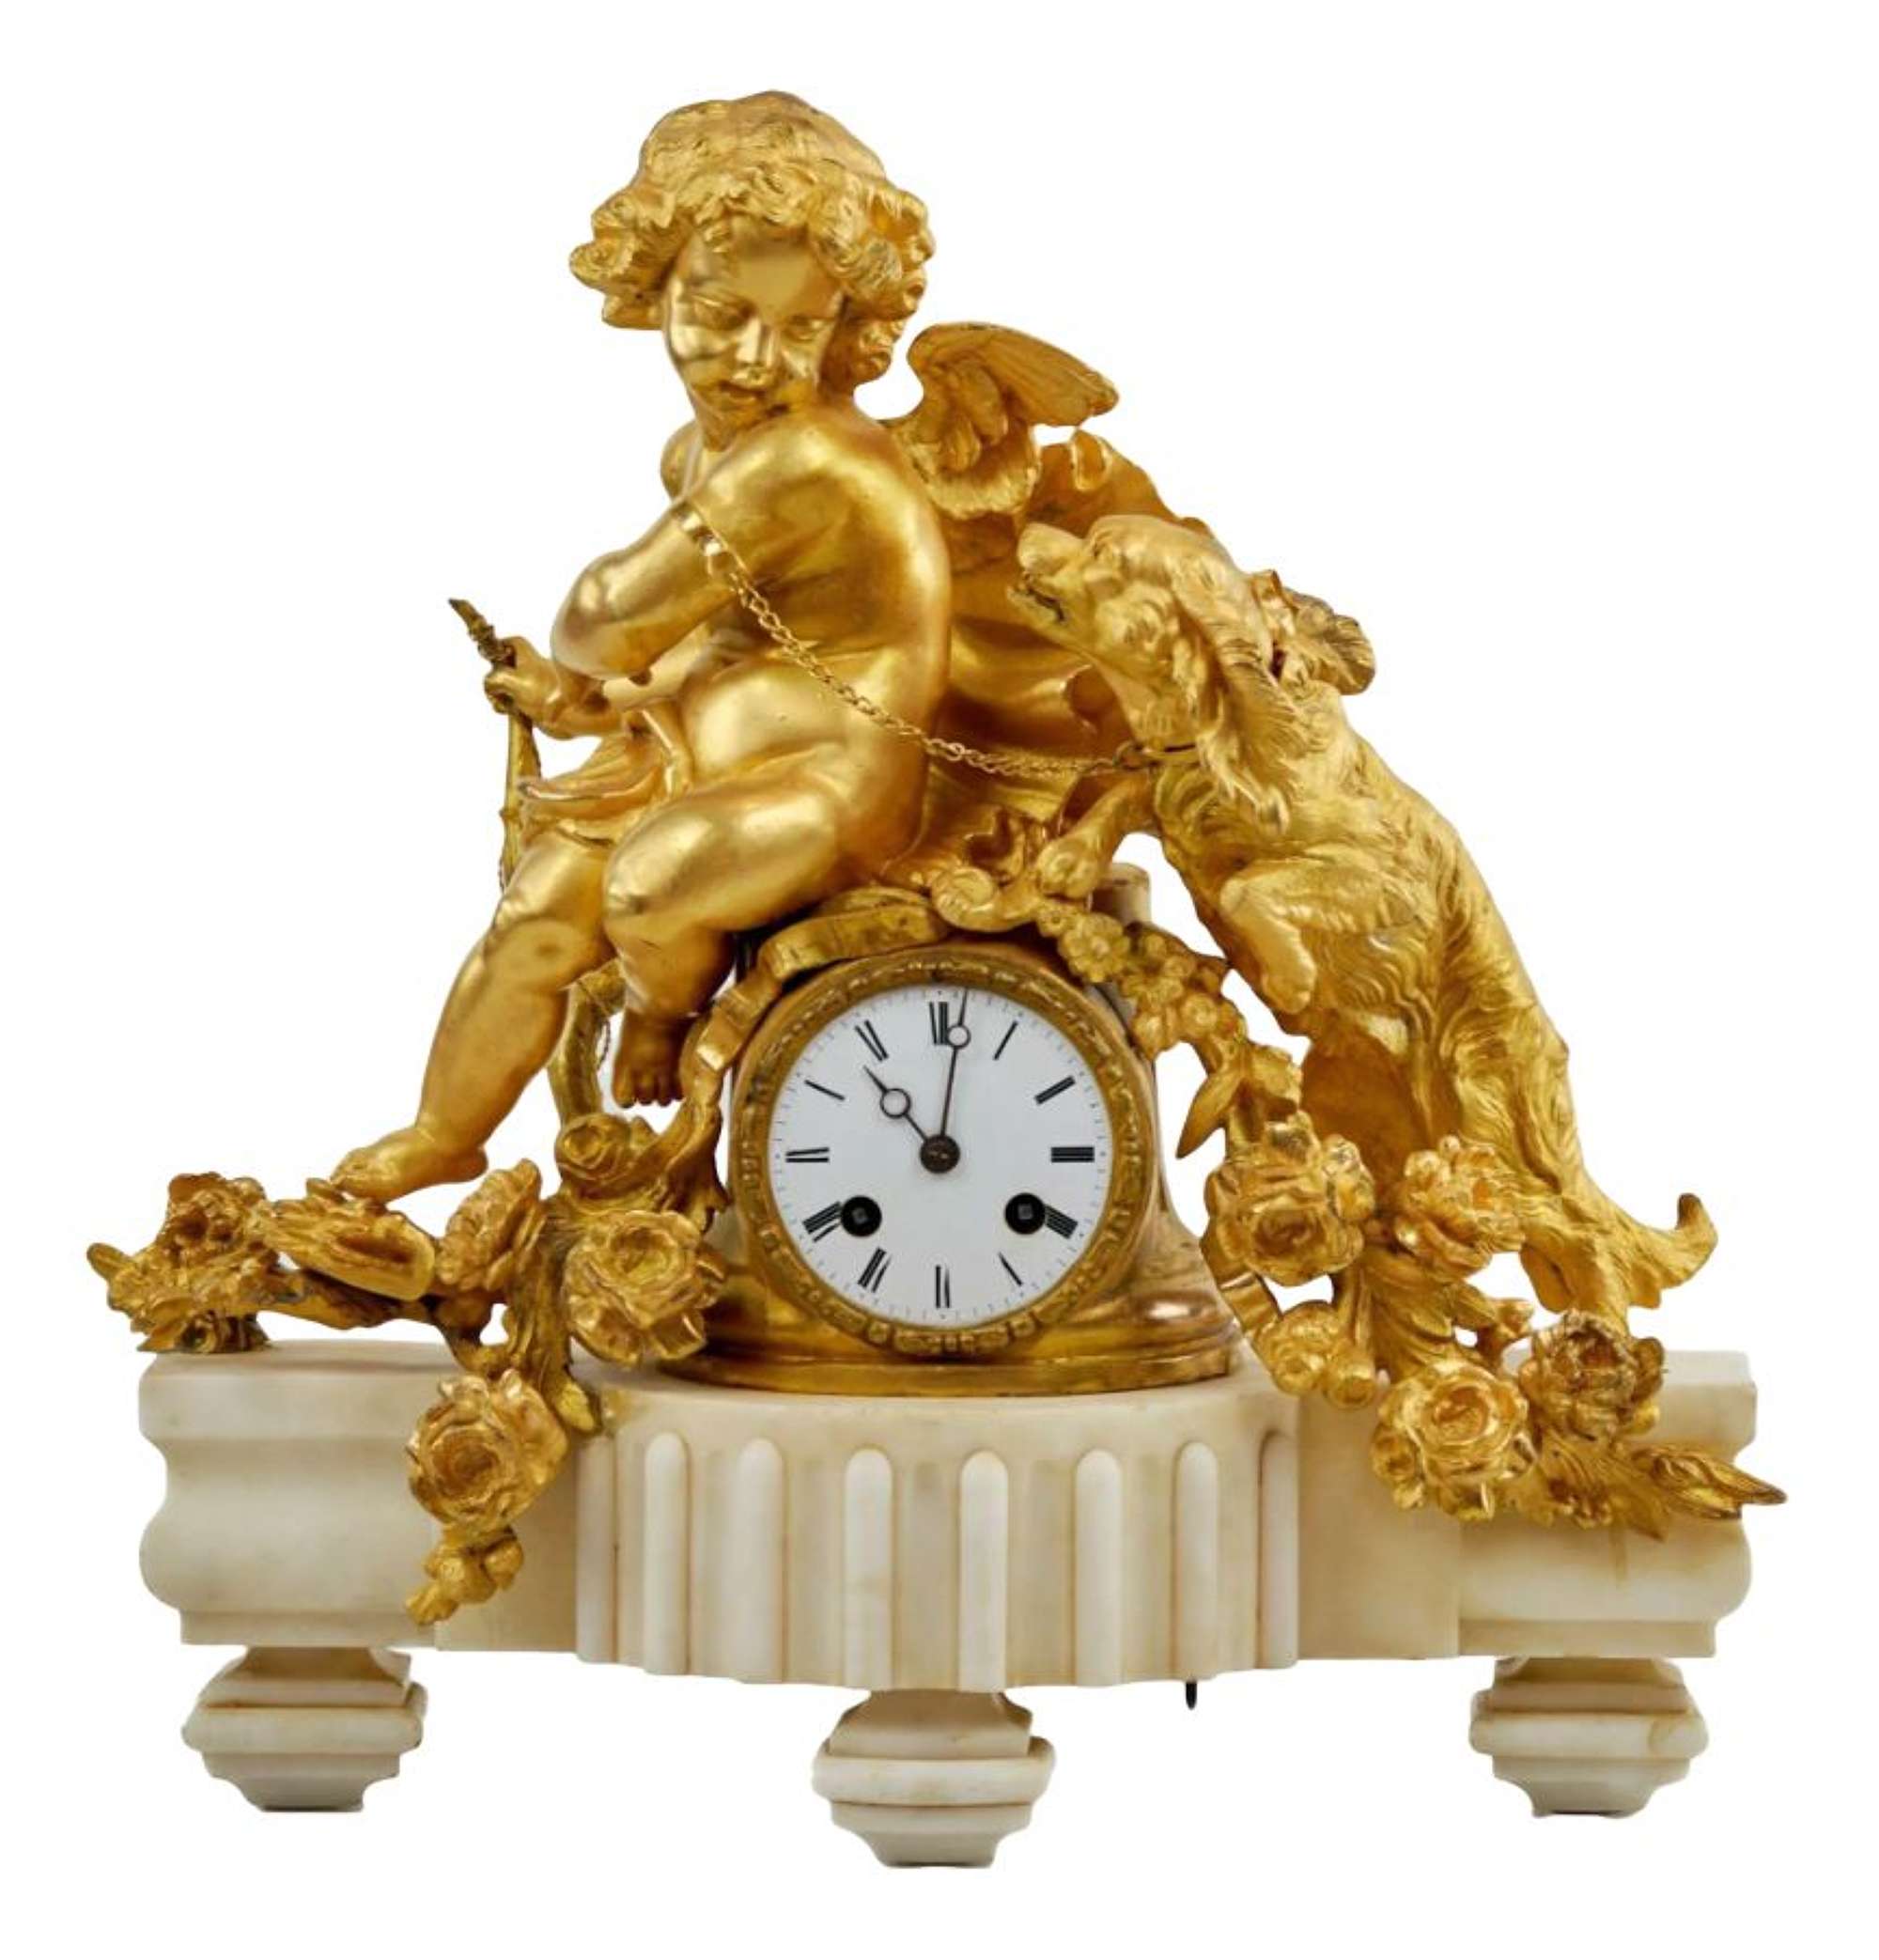 Putti With a Dog Mantel Clock by Phillipe Mourey